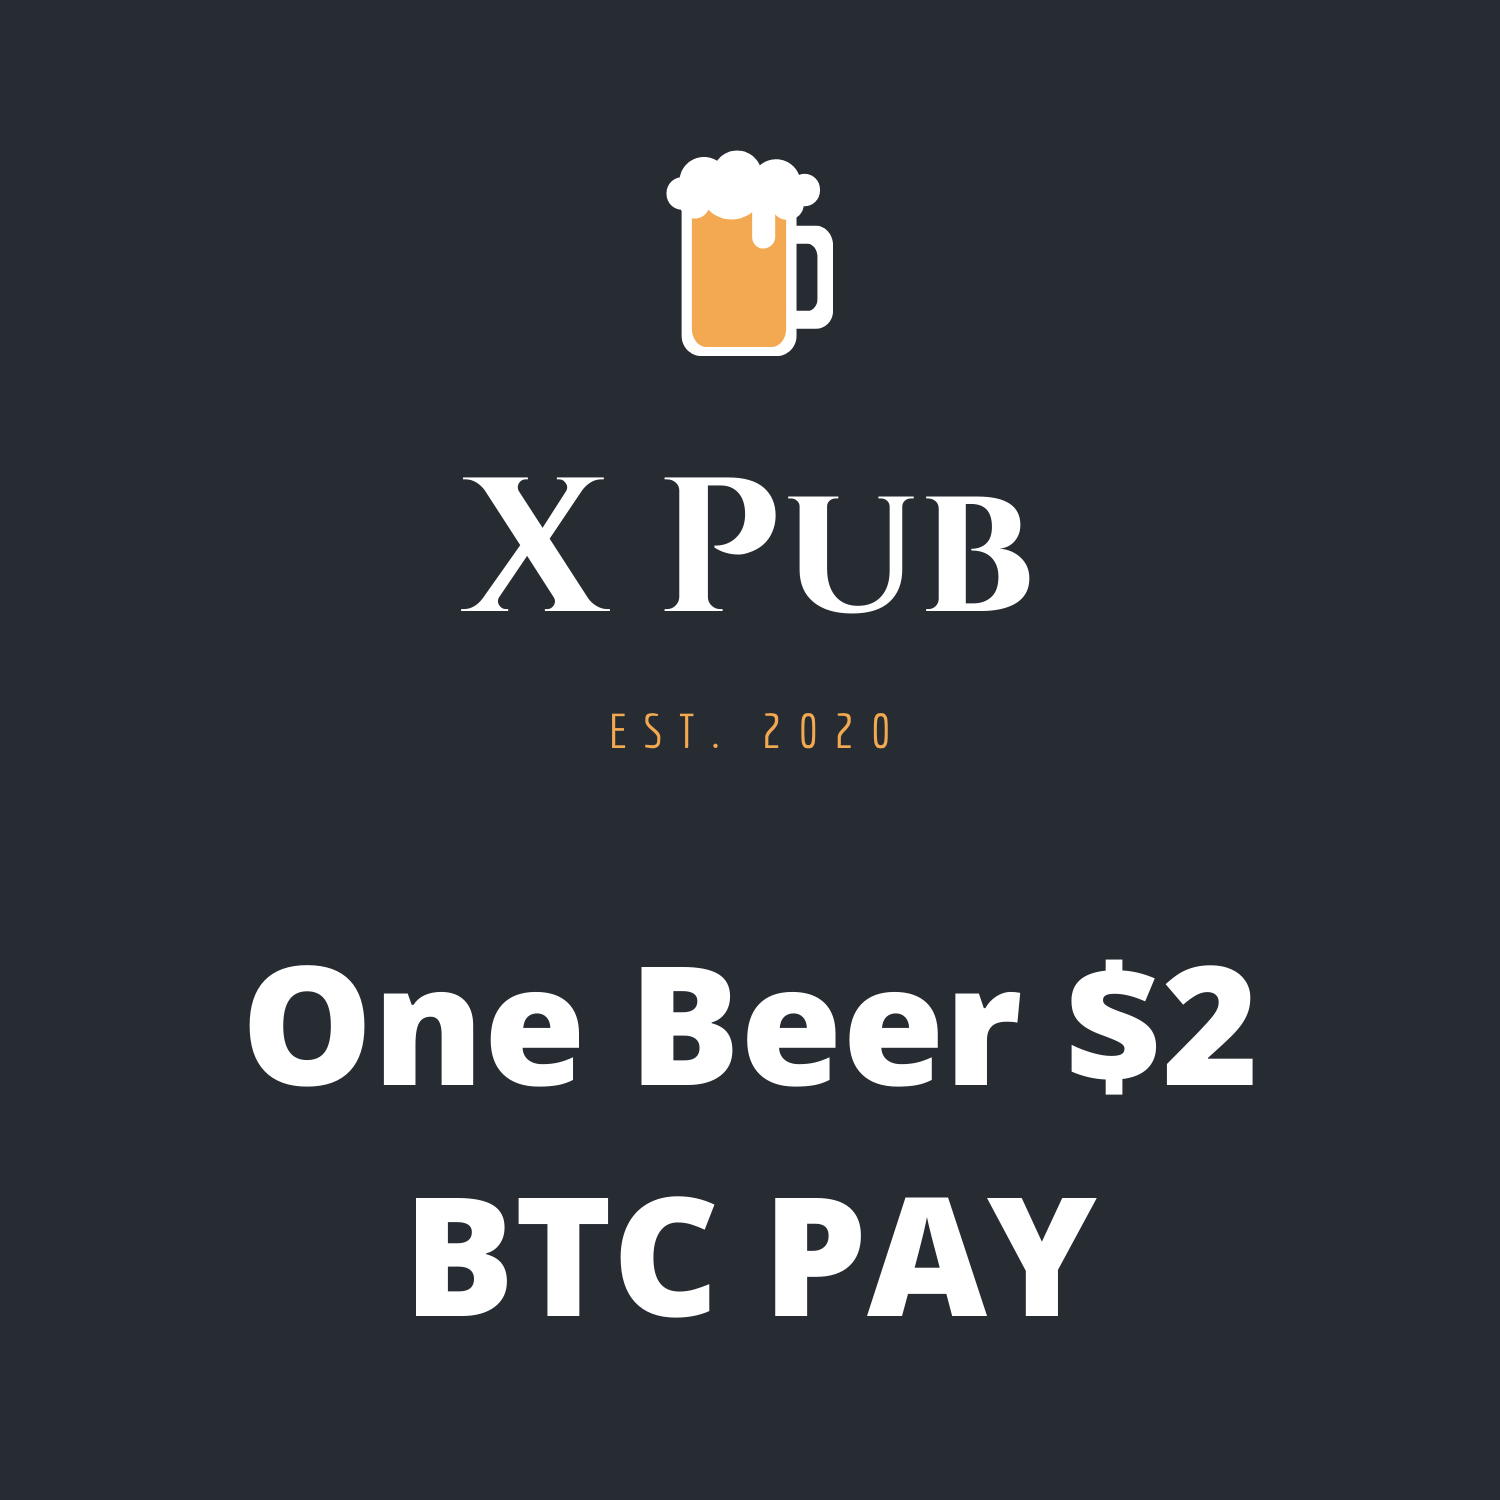 One Beer - BTC Pay - $2